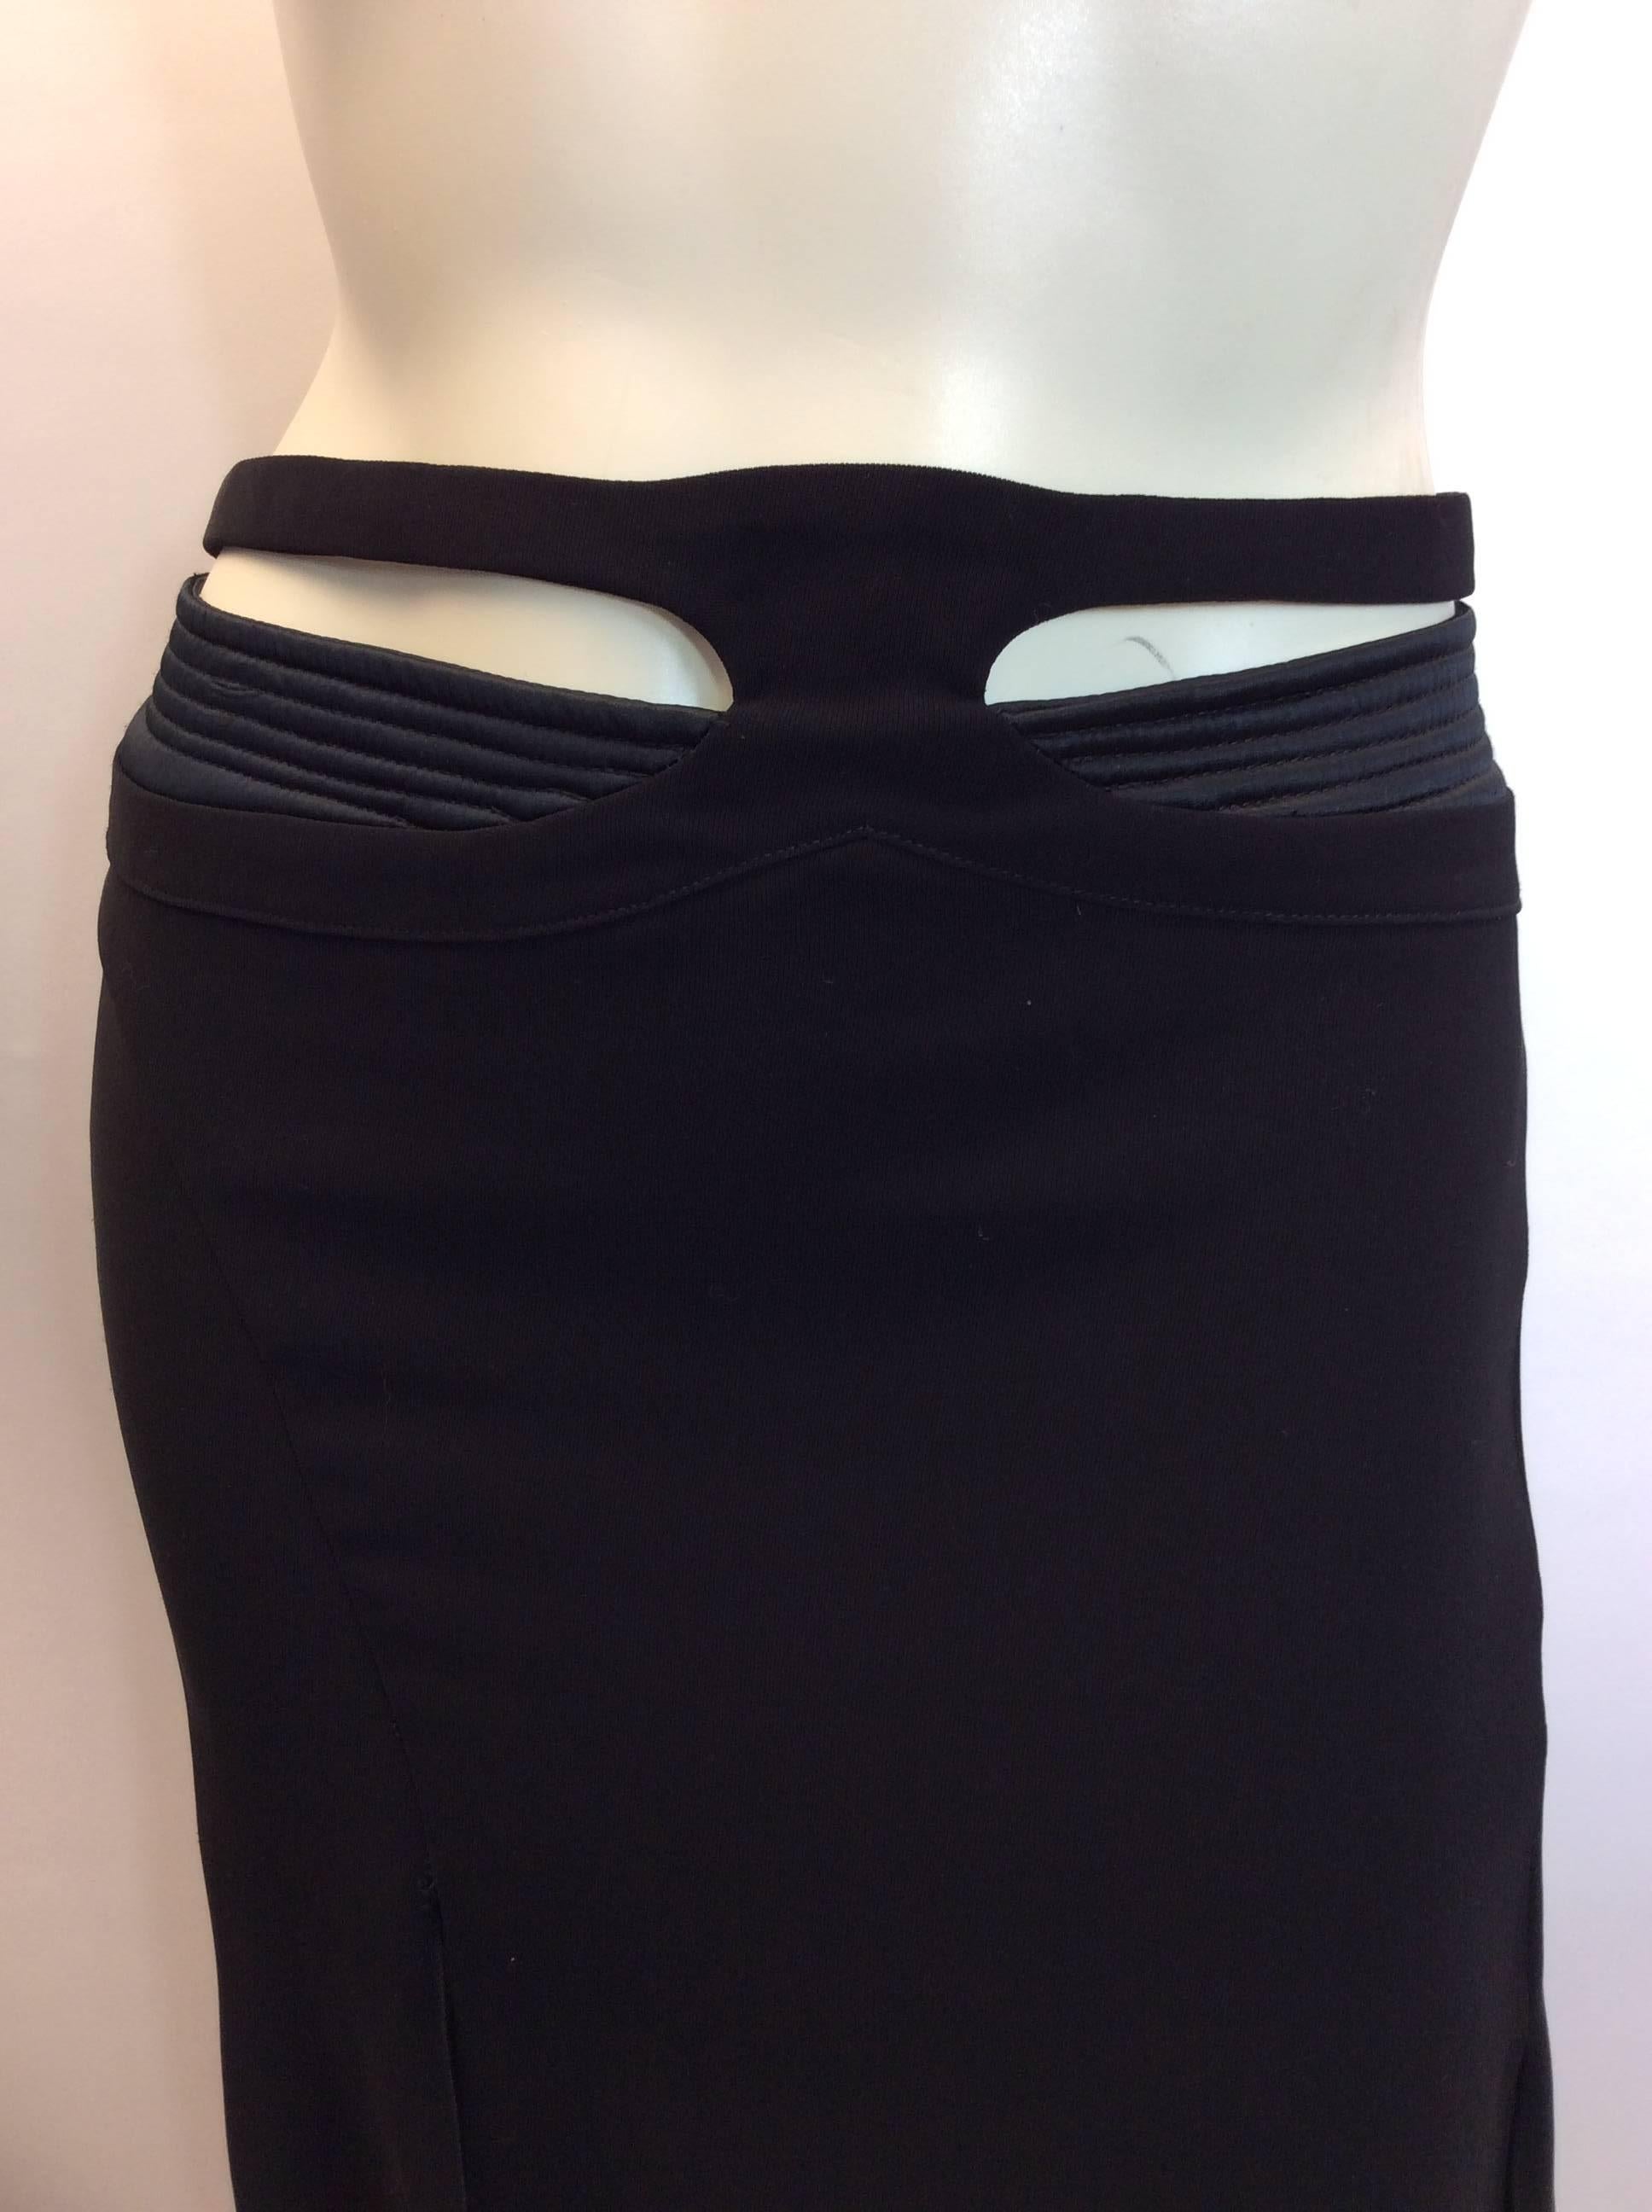 Versace Maxi Belted Skirt
$199
Made in Italy
100% Polyester
Size 40

